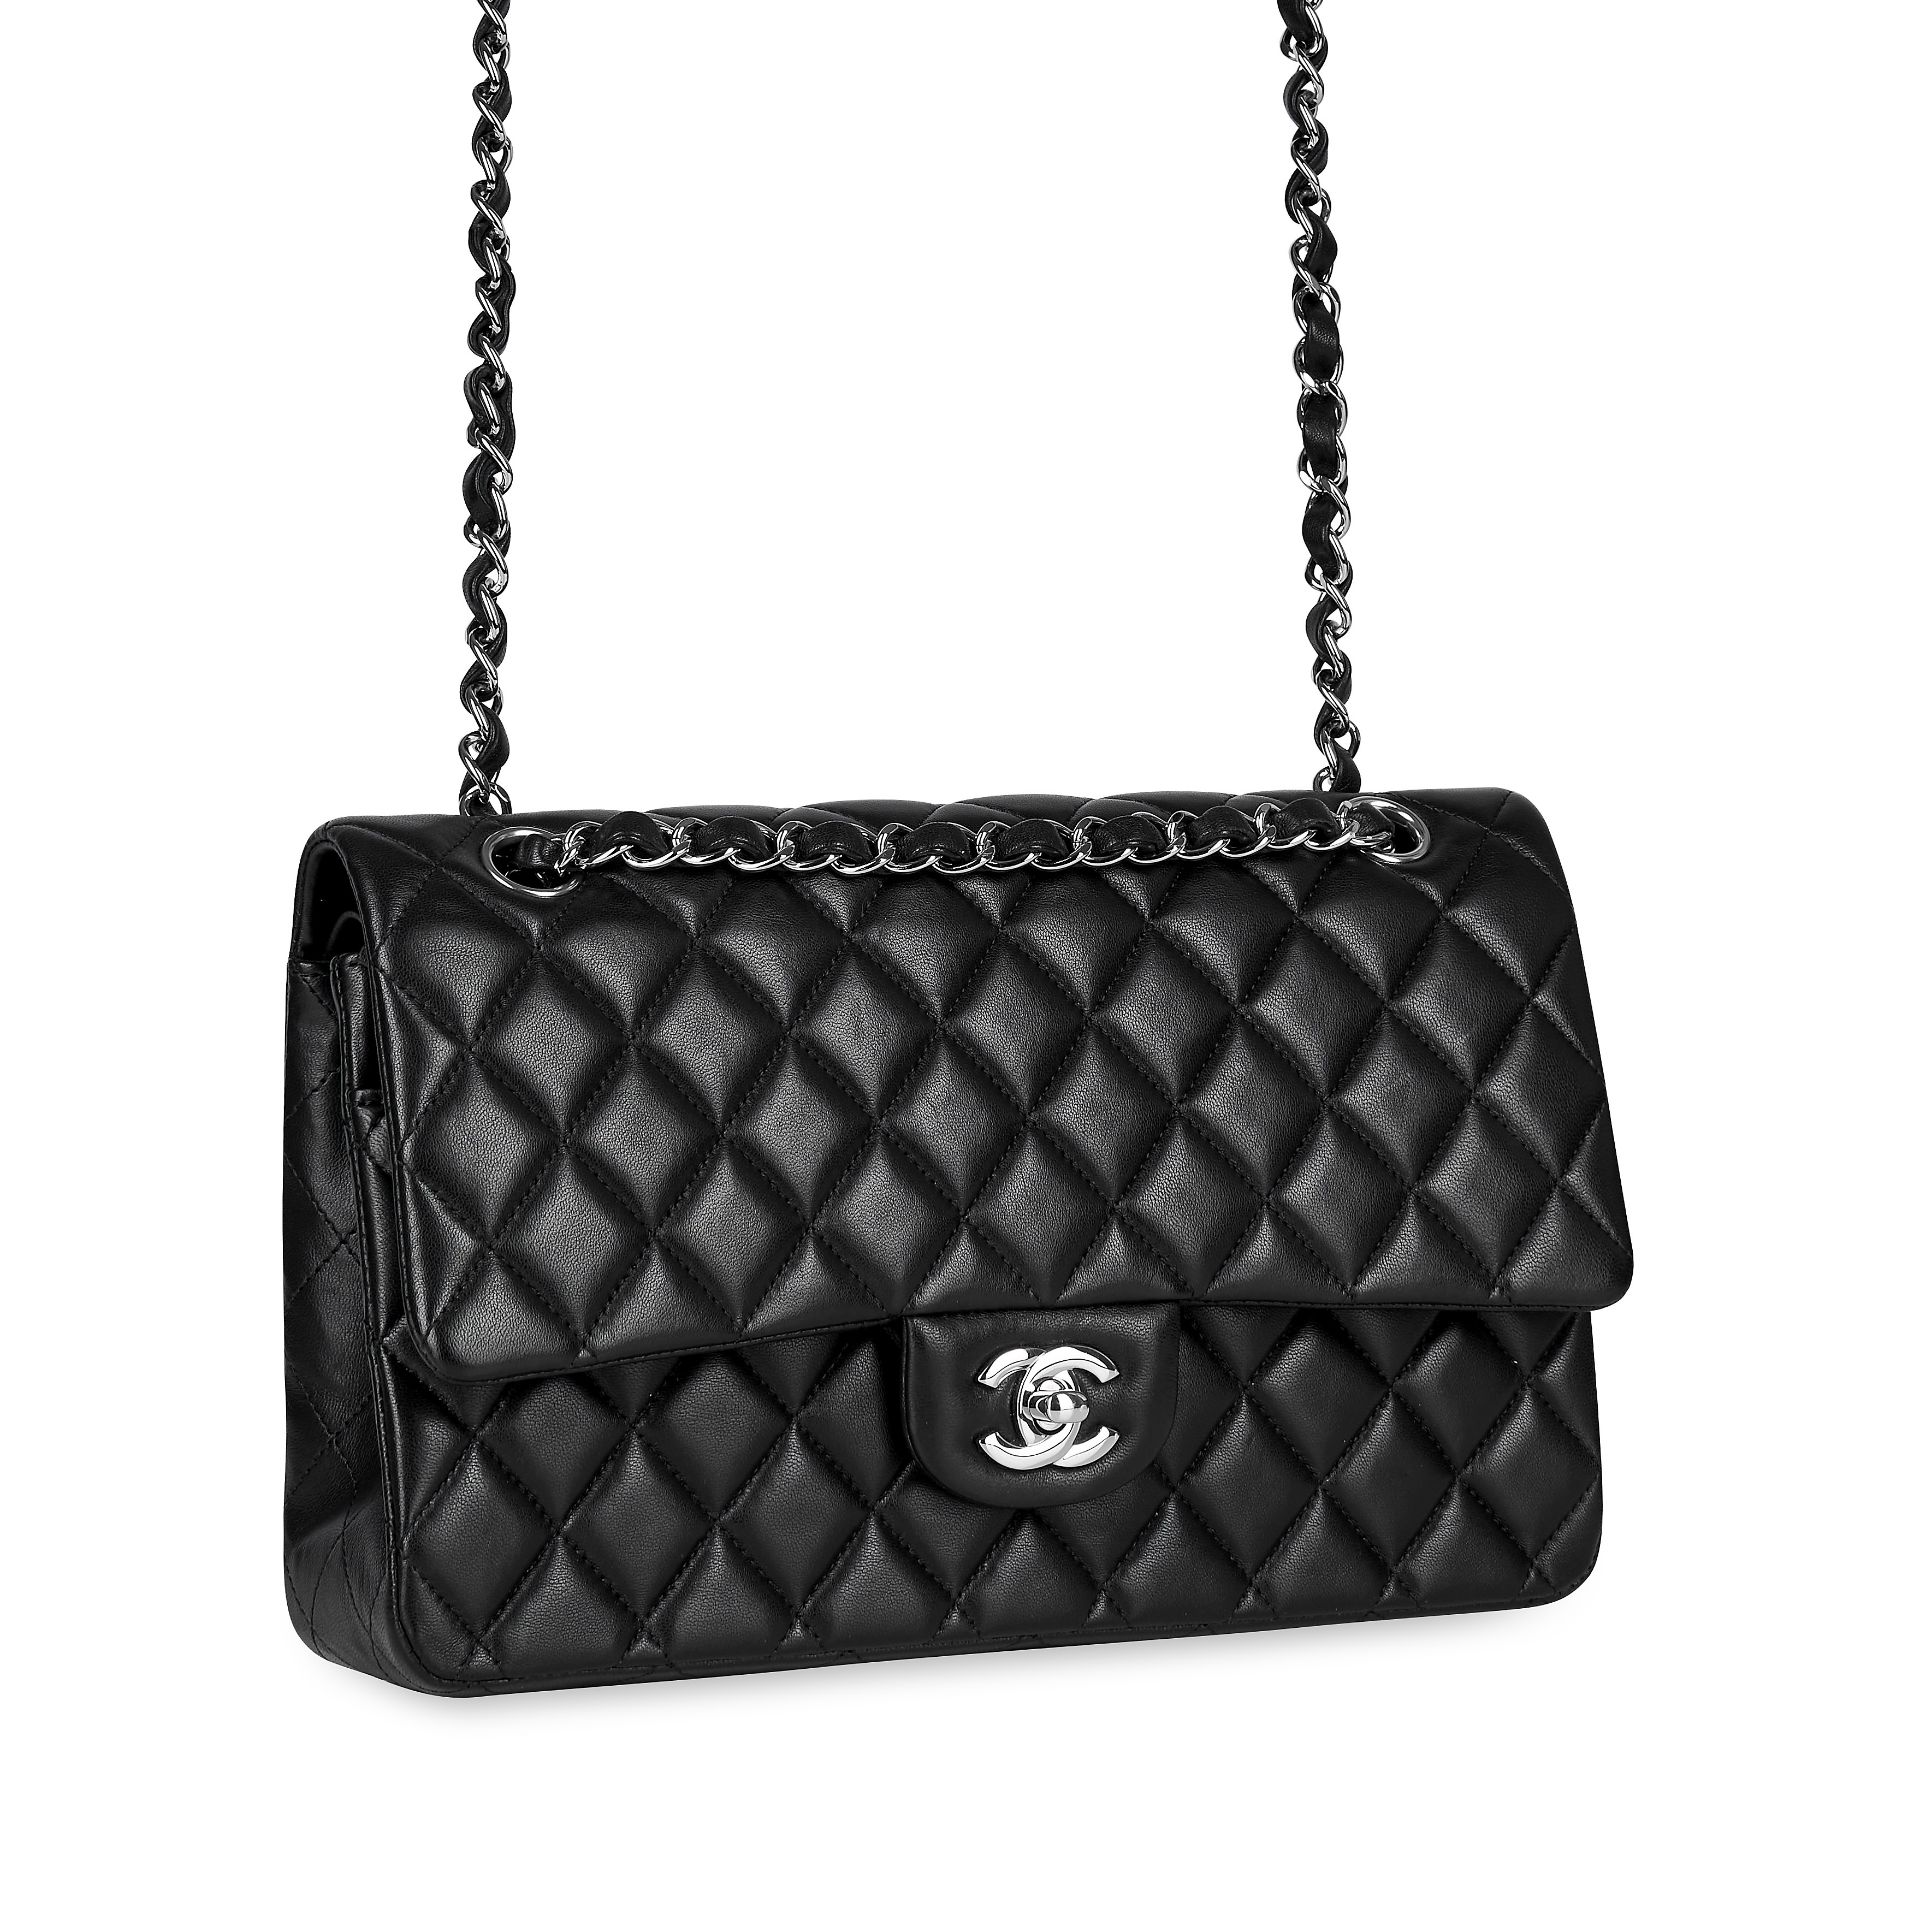 CHANEL BLACK LAMBSKIN MEDIUM CLASSIC FLAP BAG Condition grade B-. Produced in 2014. 25cm long, ... - Image 2 of 6